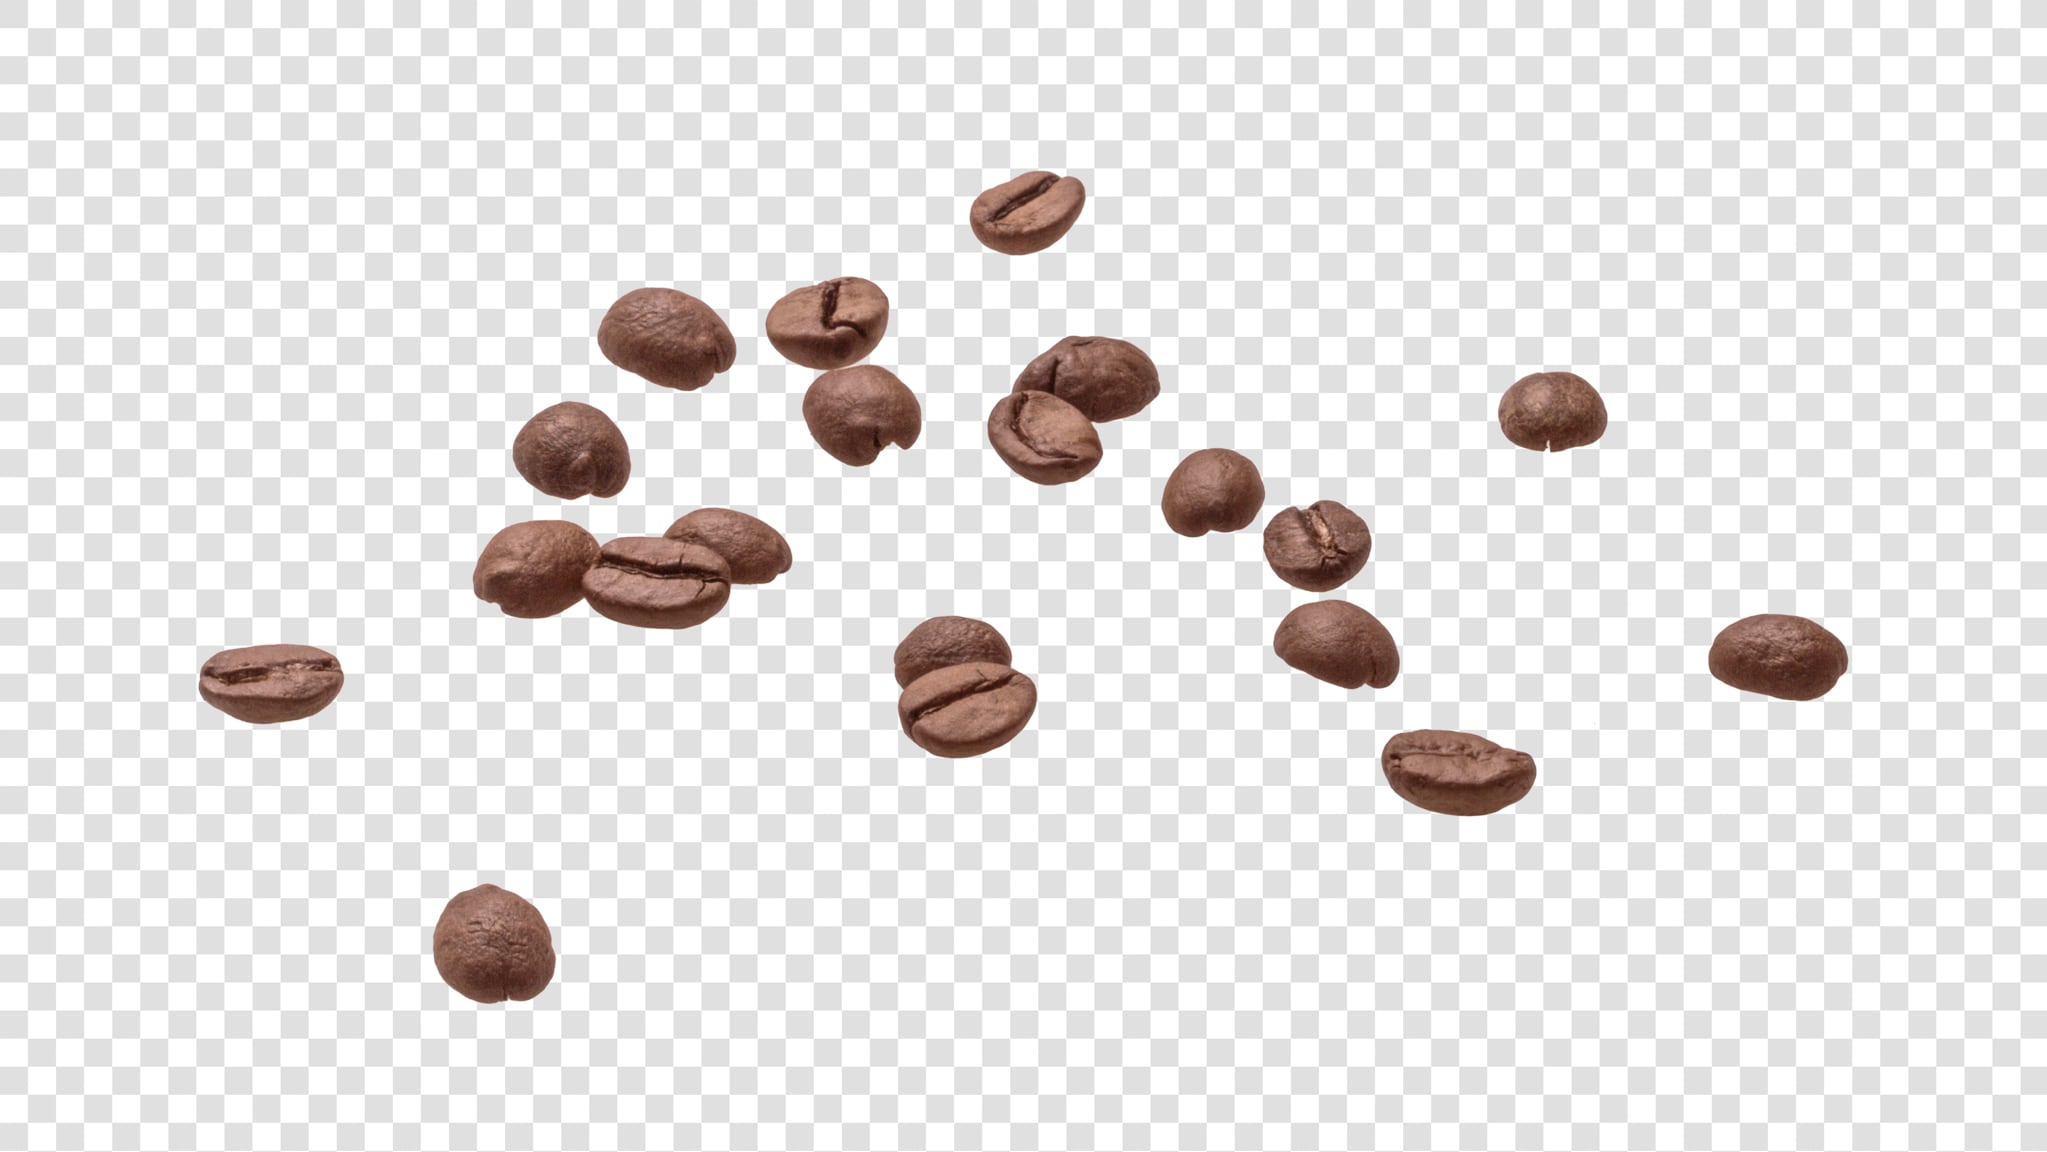 Coffee PSD image with transparent background